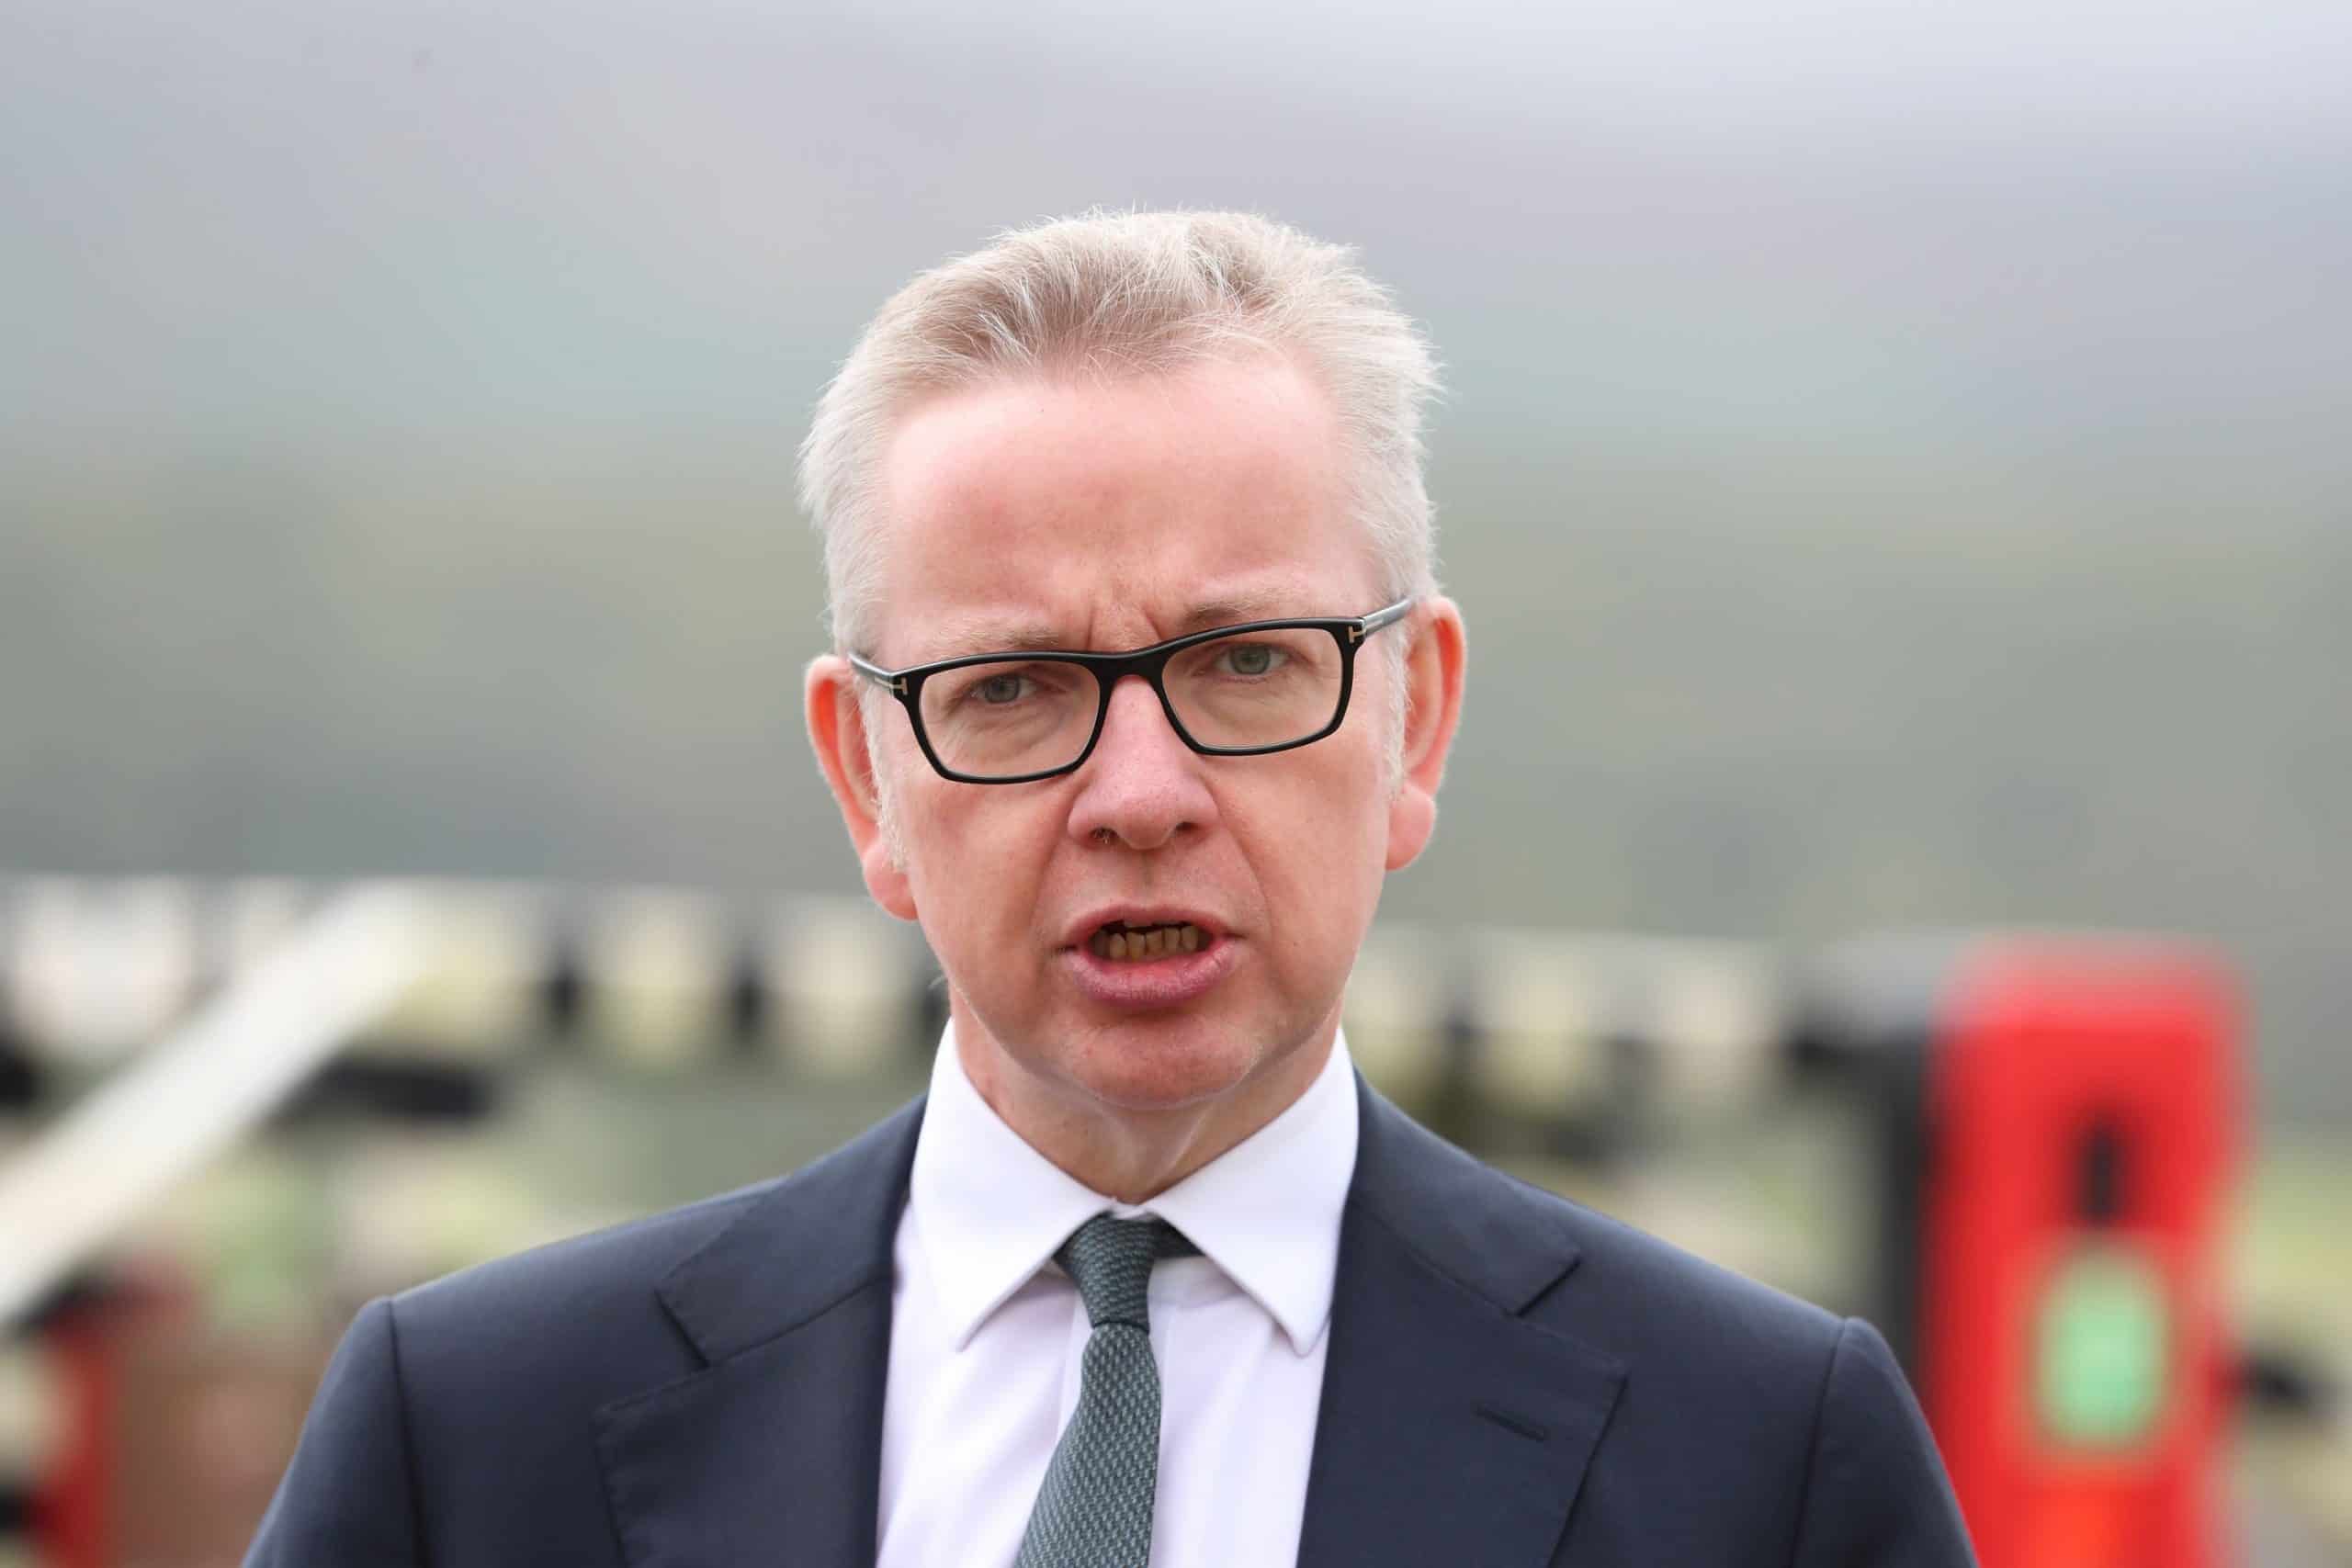 WATCH: The time when Gove spoke passionately about protecting food standards